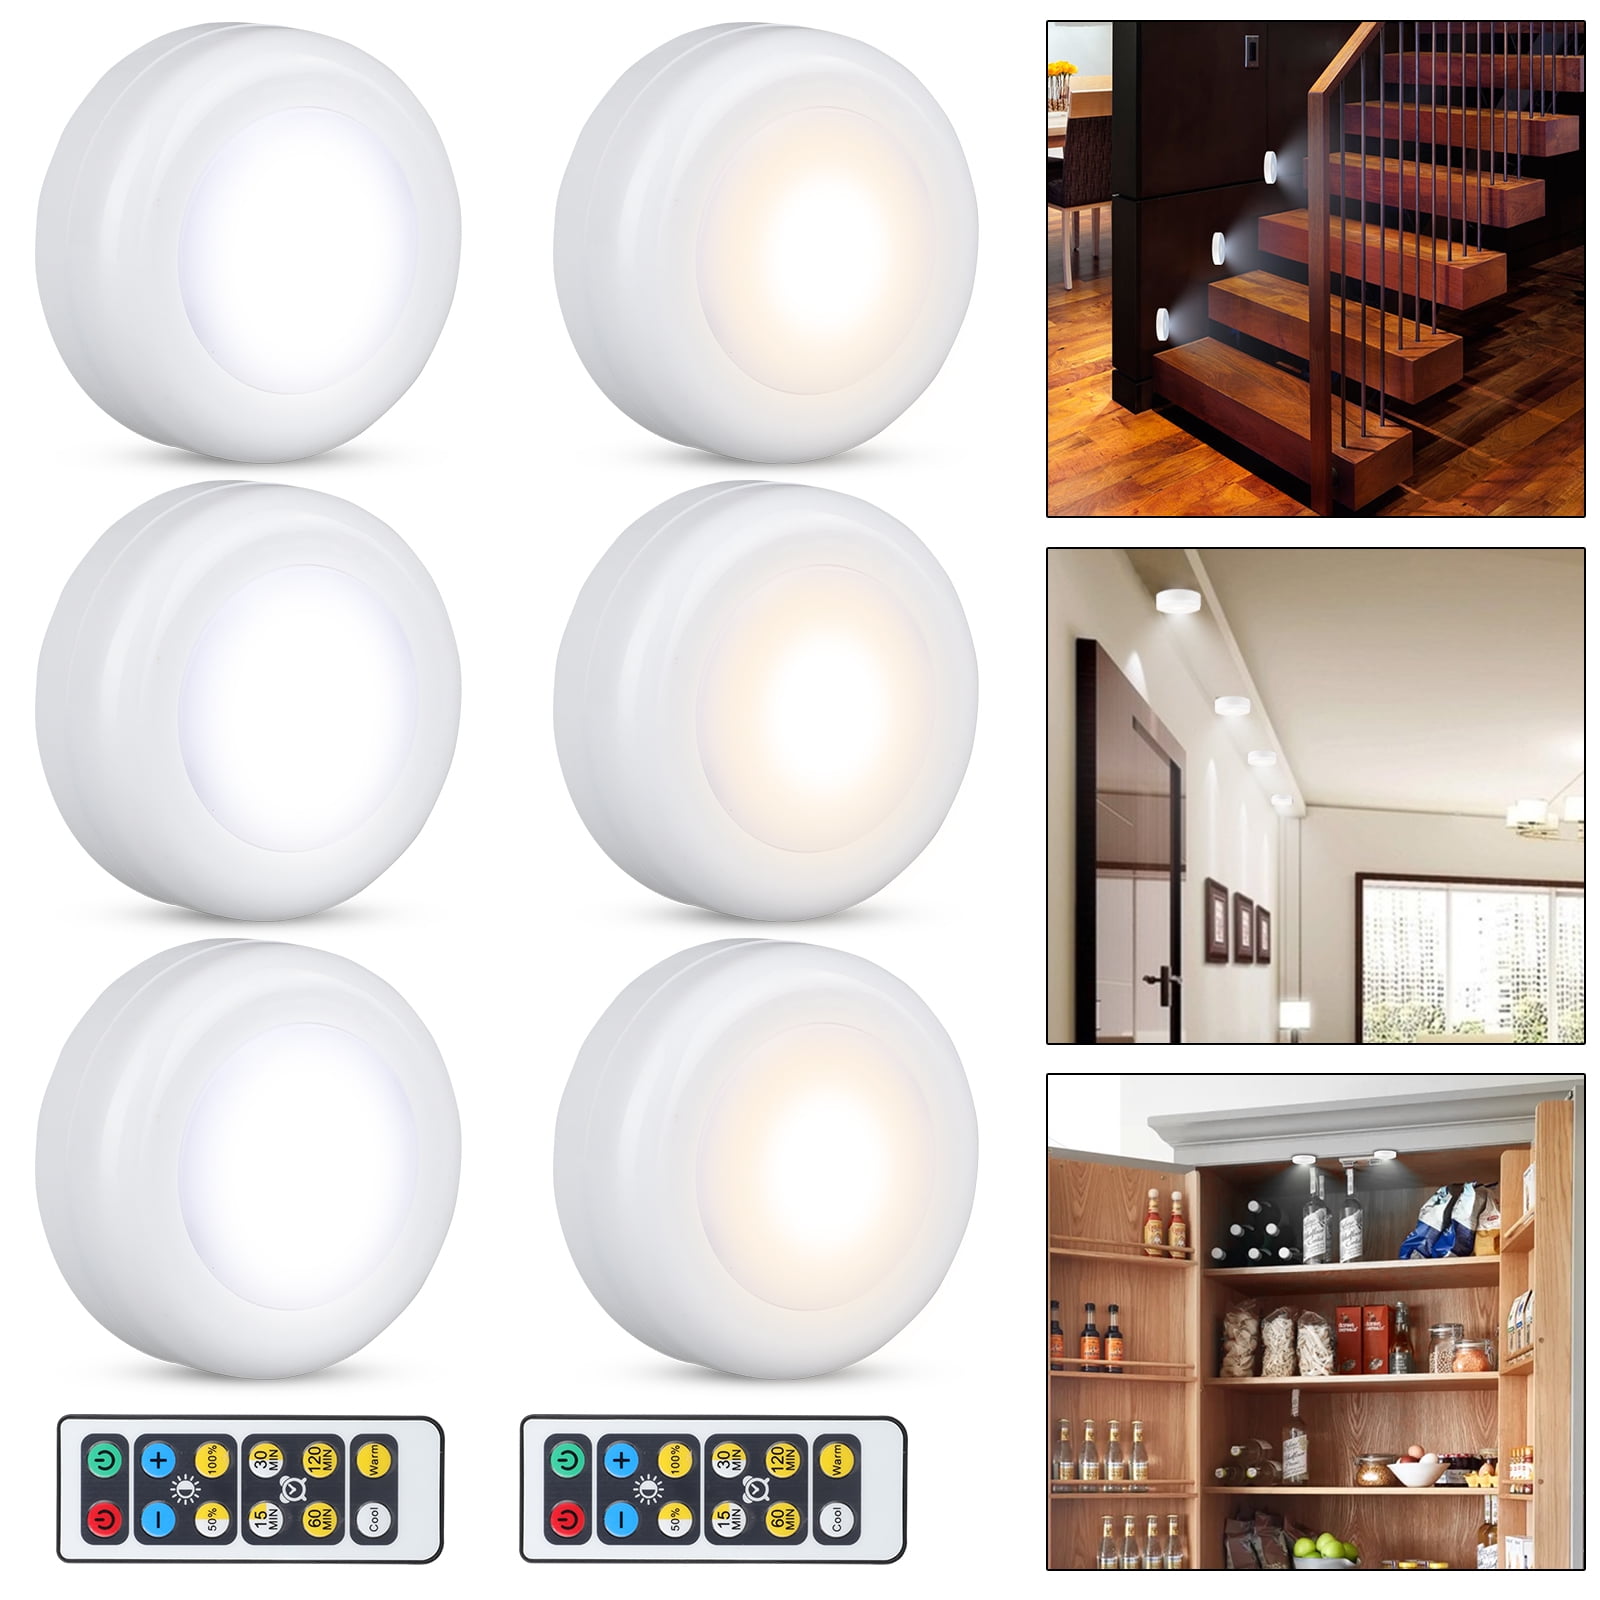 6PCS Puck Lights With Remote, TSV Wireless Led Puck Lights Battery Operated, Led Puck Lights